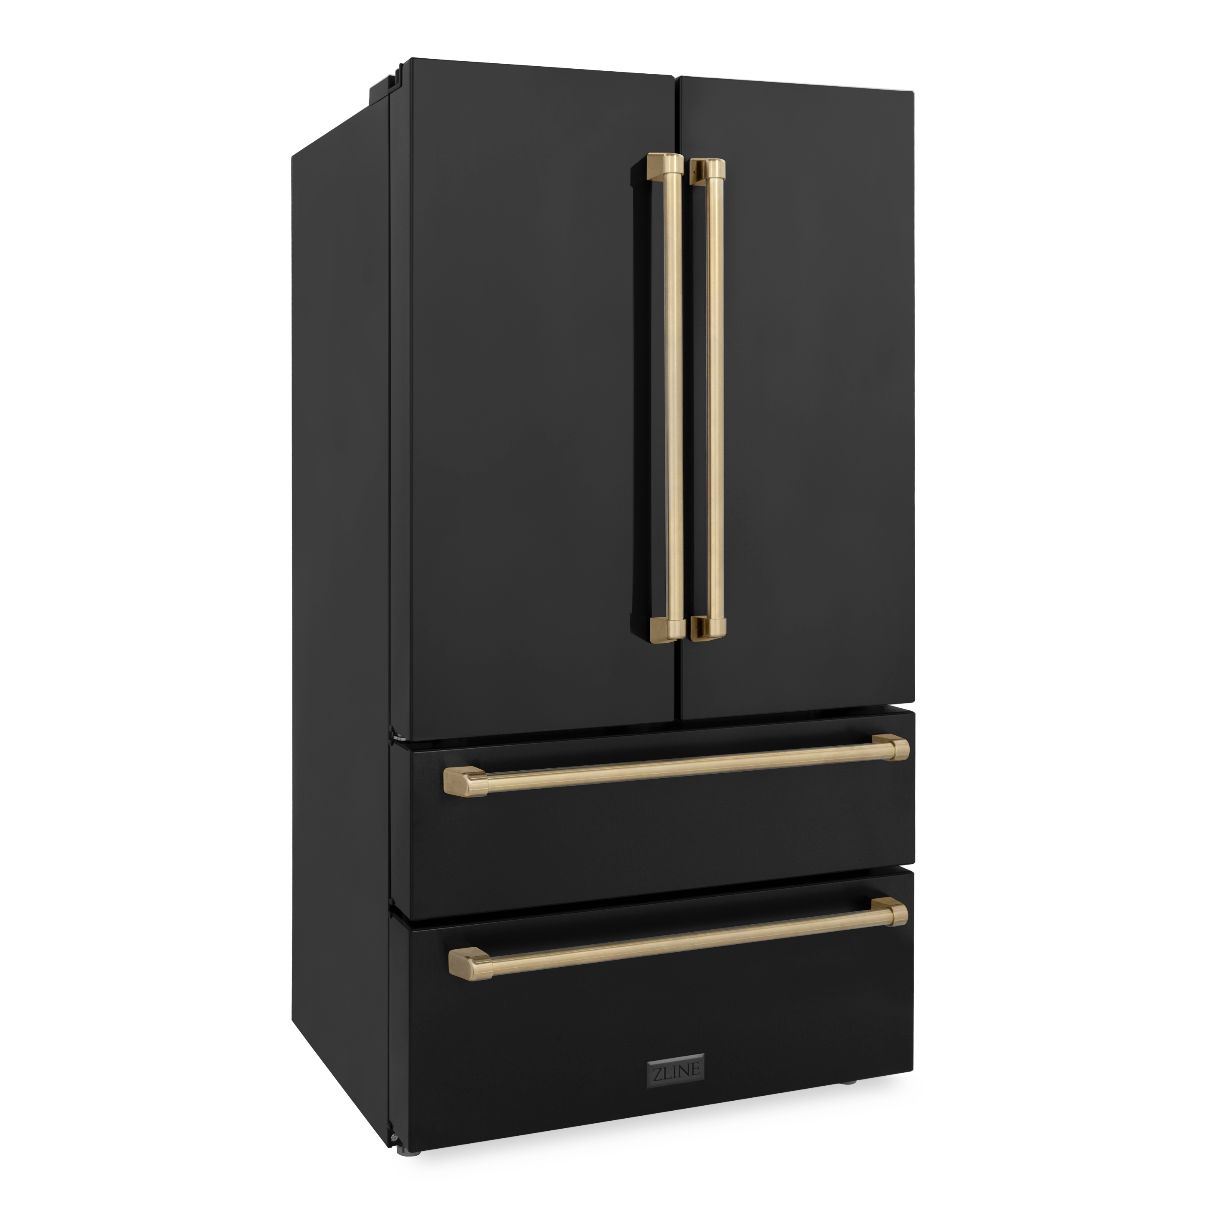 ZLINE 36" Autograph Edition 22.5 cu. ft 4-Door French Door Refrigerator with Ice Maker in Fingerprint Resistant Black Stainless Steel with Champagne Bronze Accents (RFMZ-36-BS-CB)